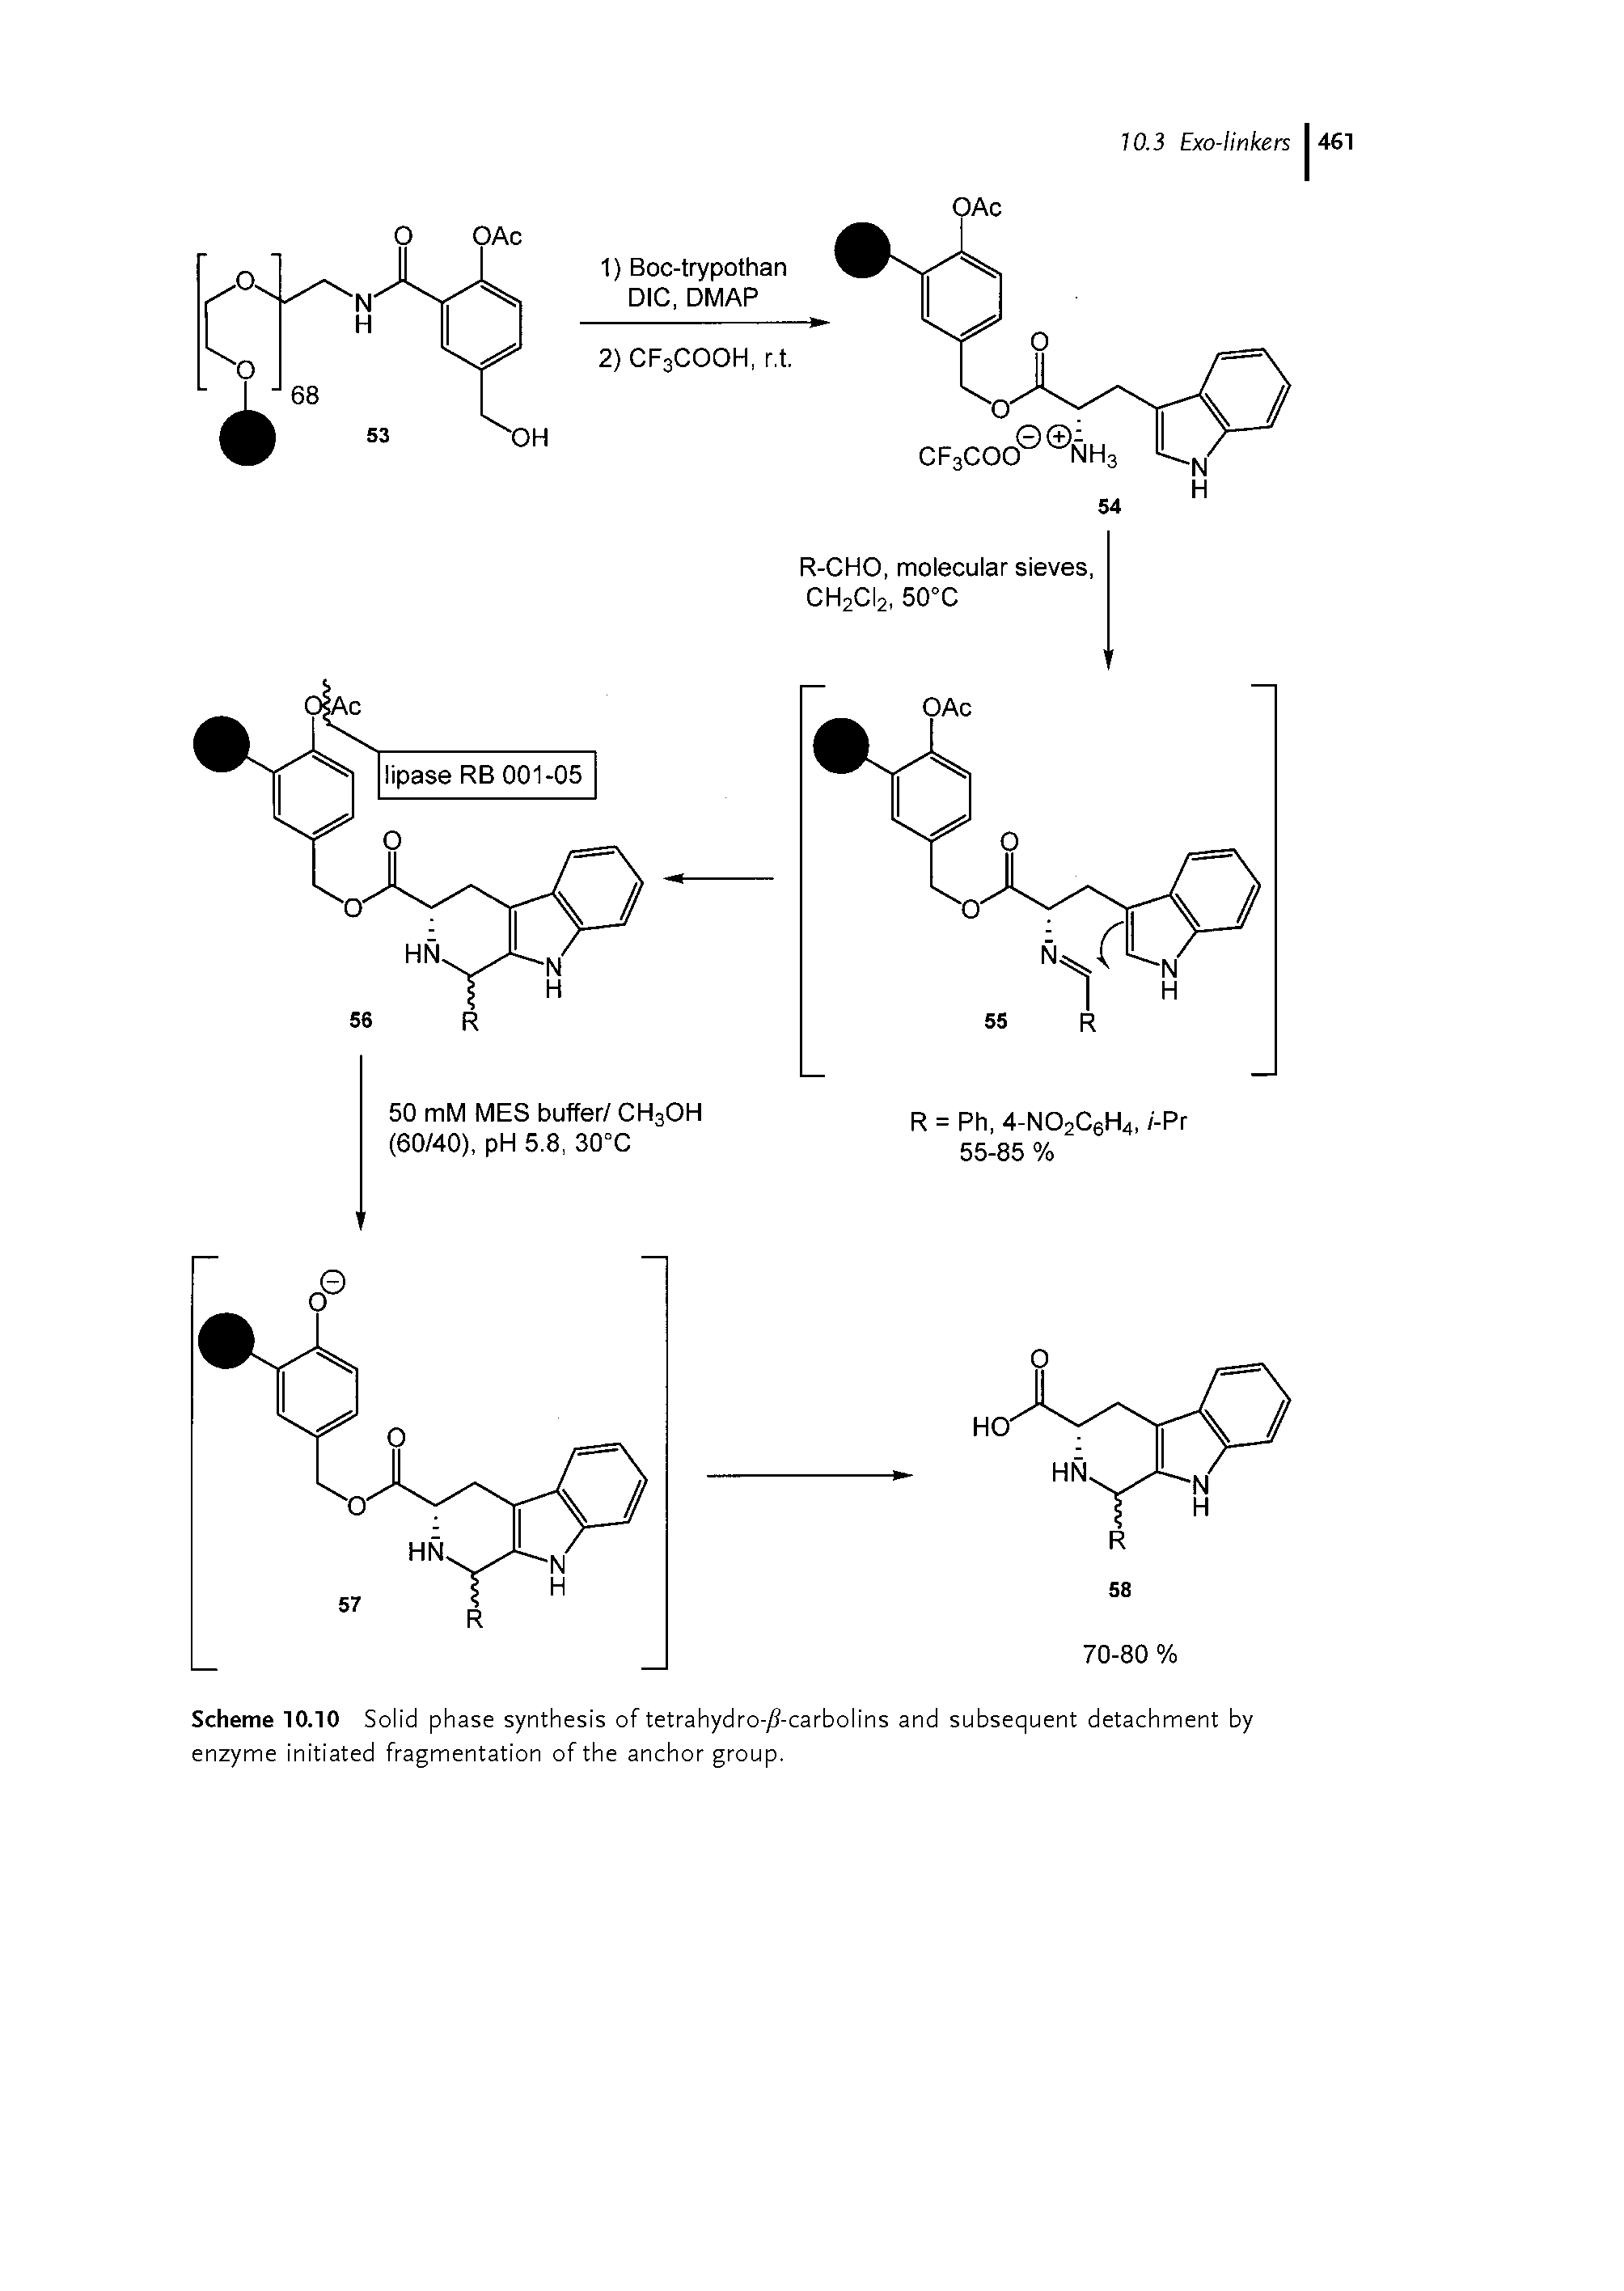 Scheme 10.10 Solid phase synthesis of tetrahydro-j8-carbolins and subsequent detachment by enzyme initiated fragmentation of the anchor group.